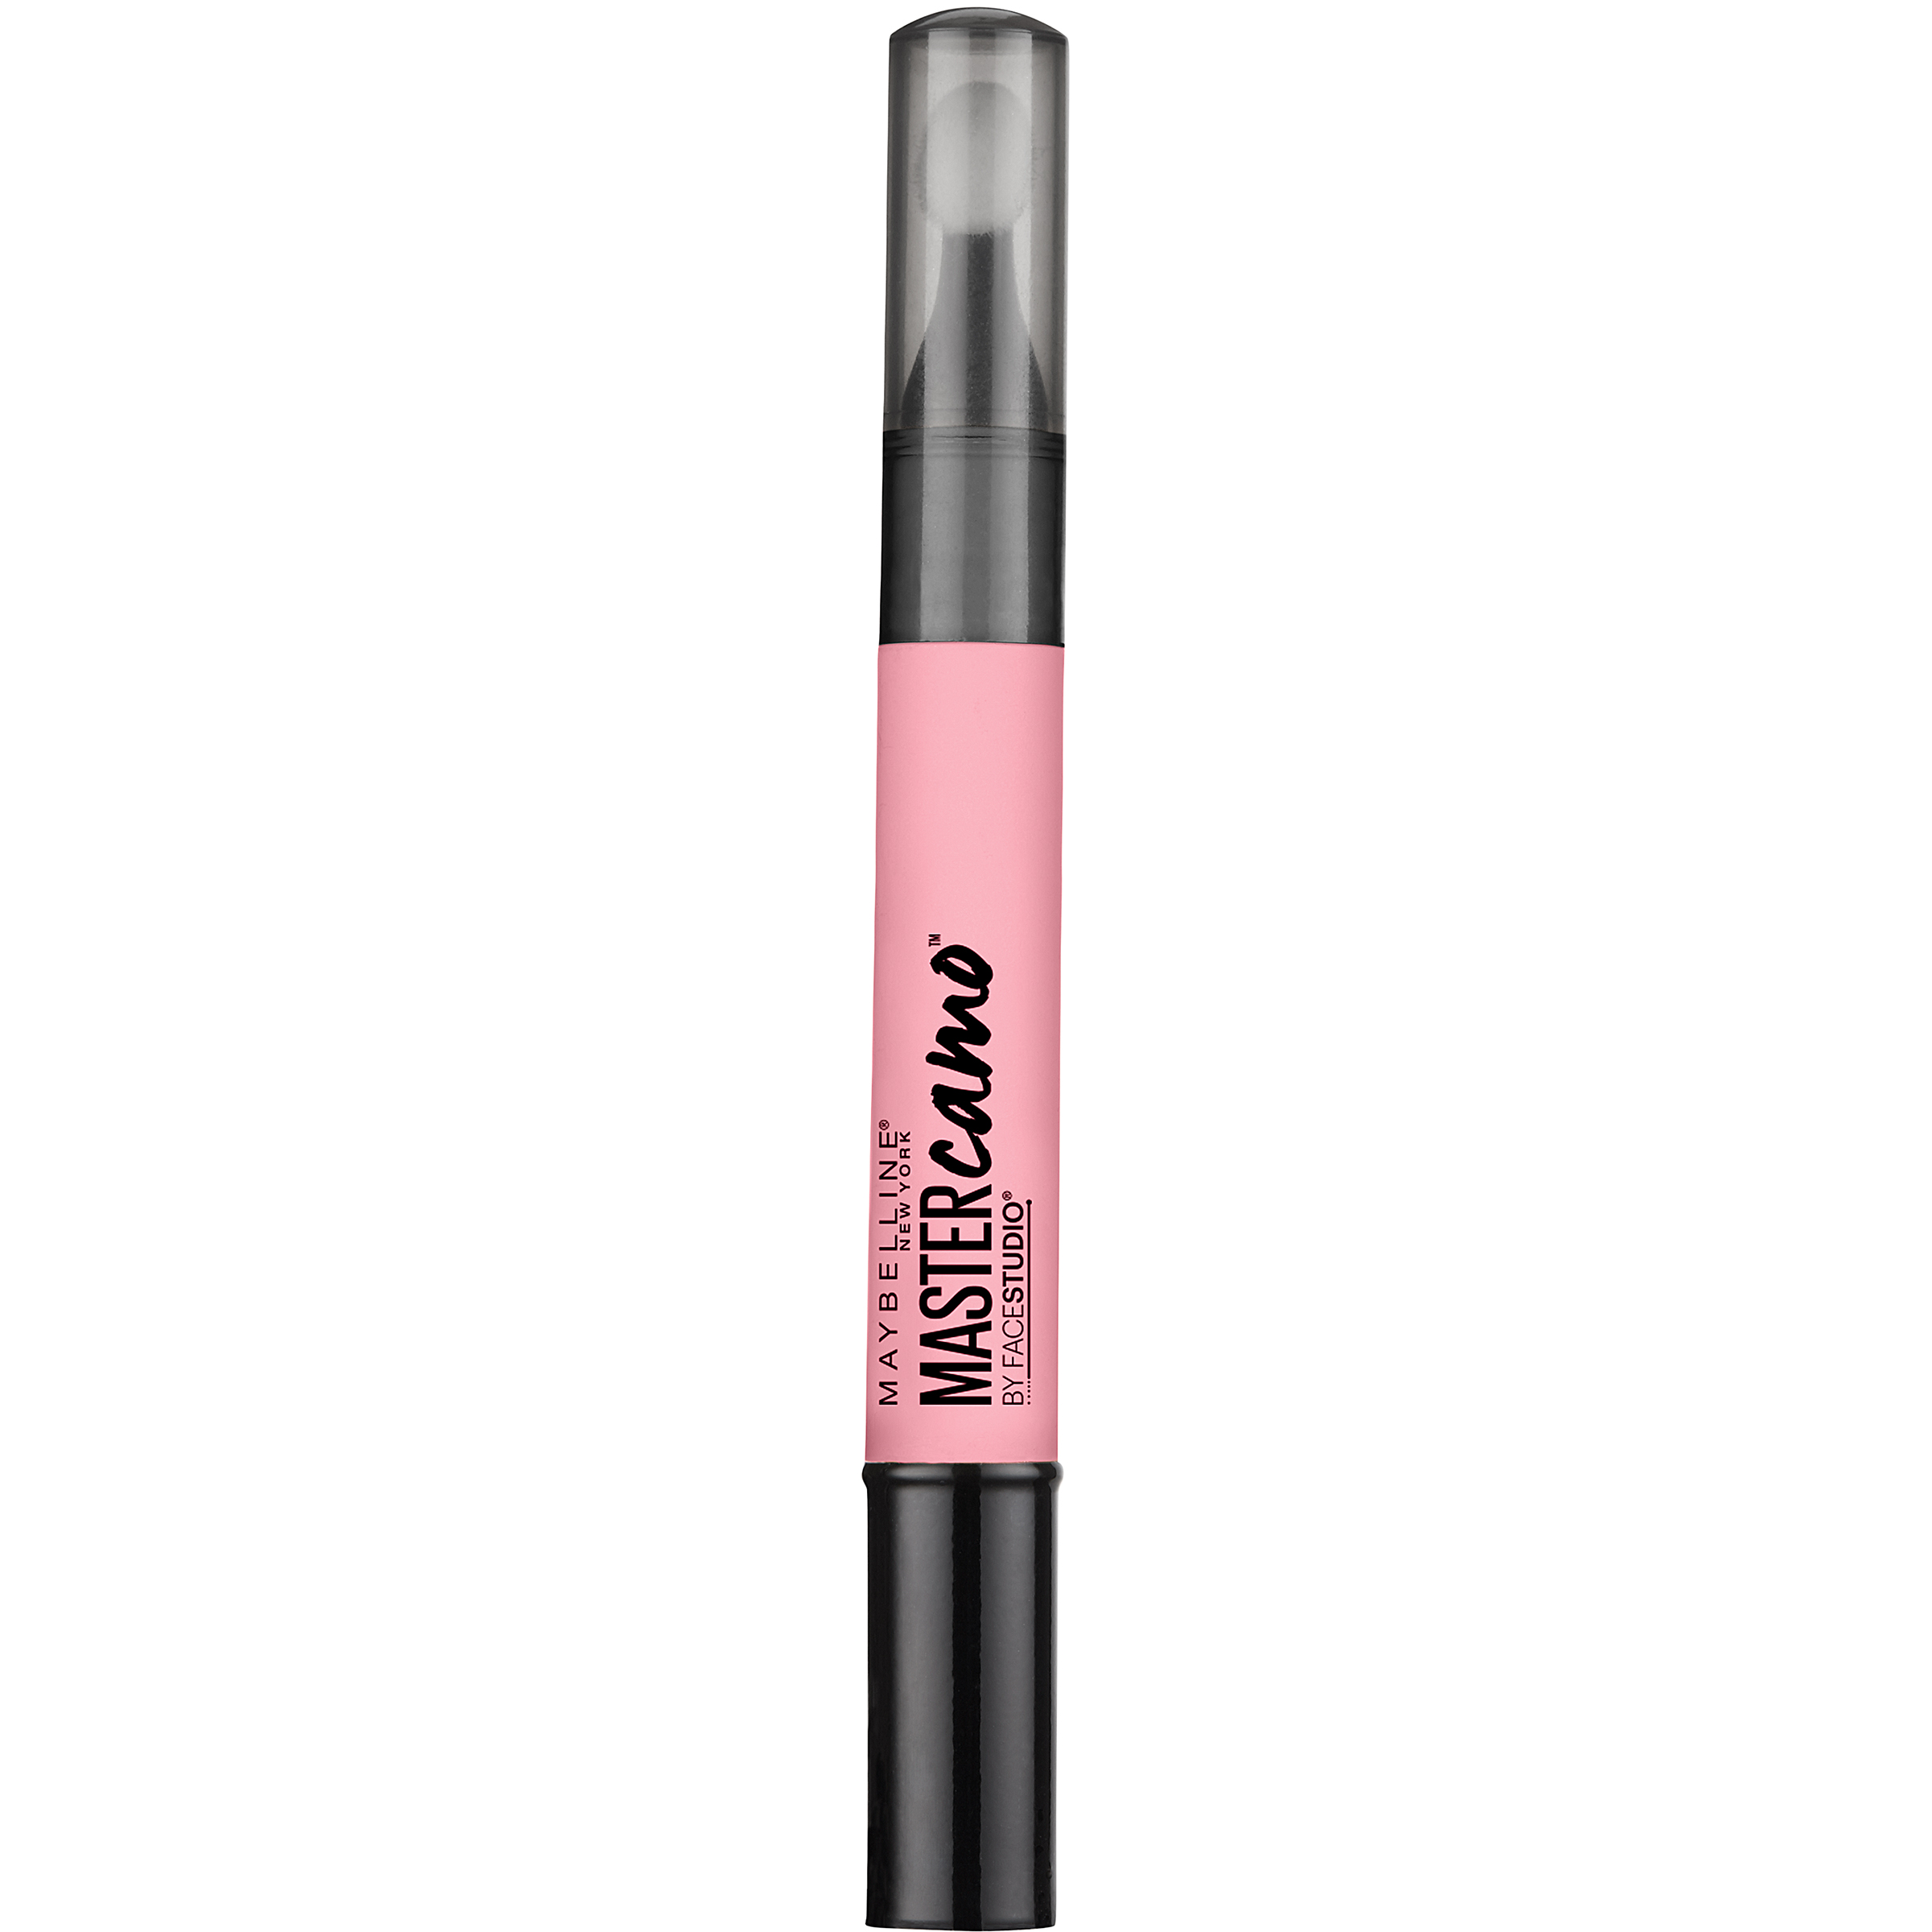 Maybelline New York Maybelline  Master Camo Color Correcting Pen, Pink For Dullness, light, 0.05 fl. oz.